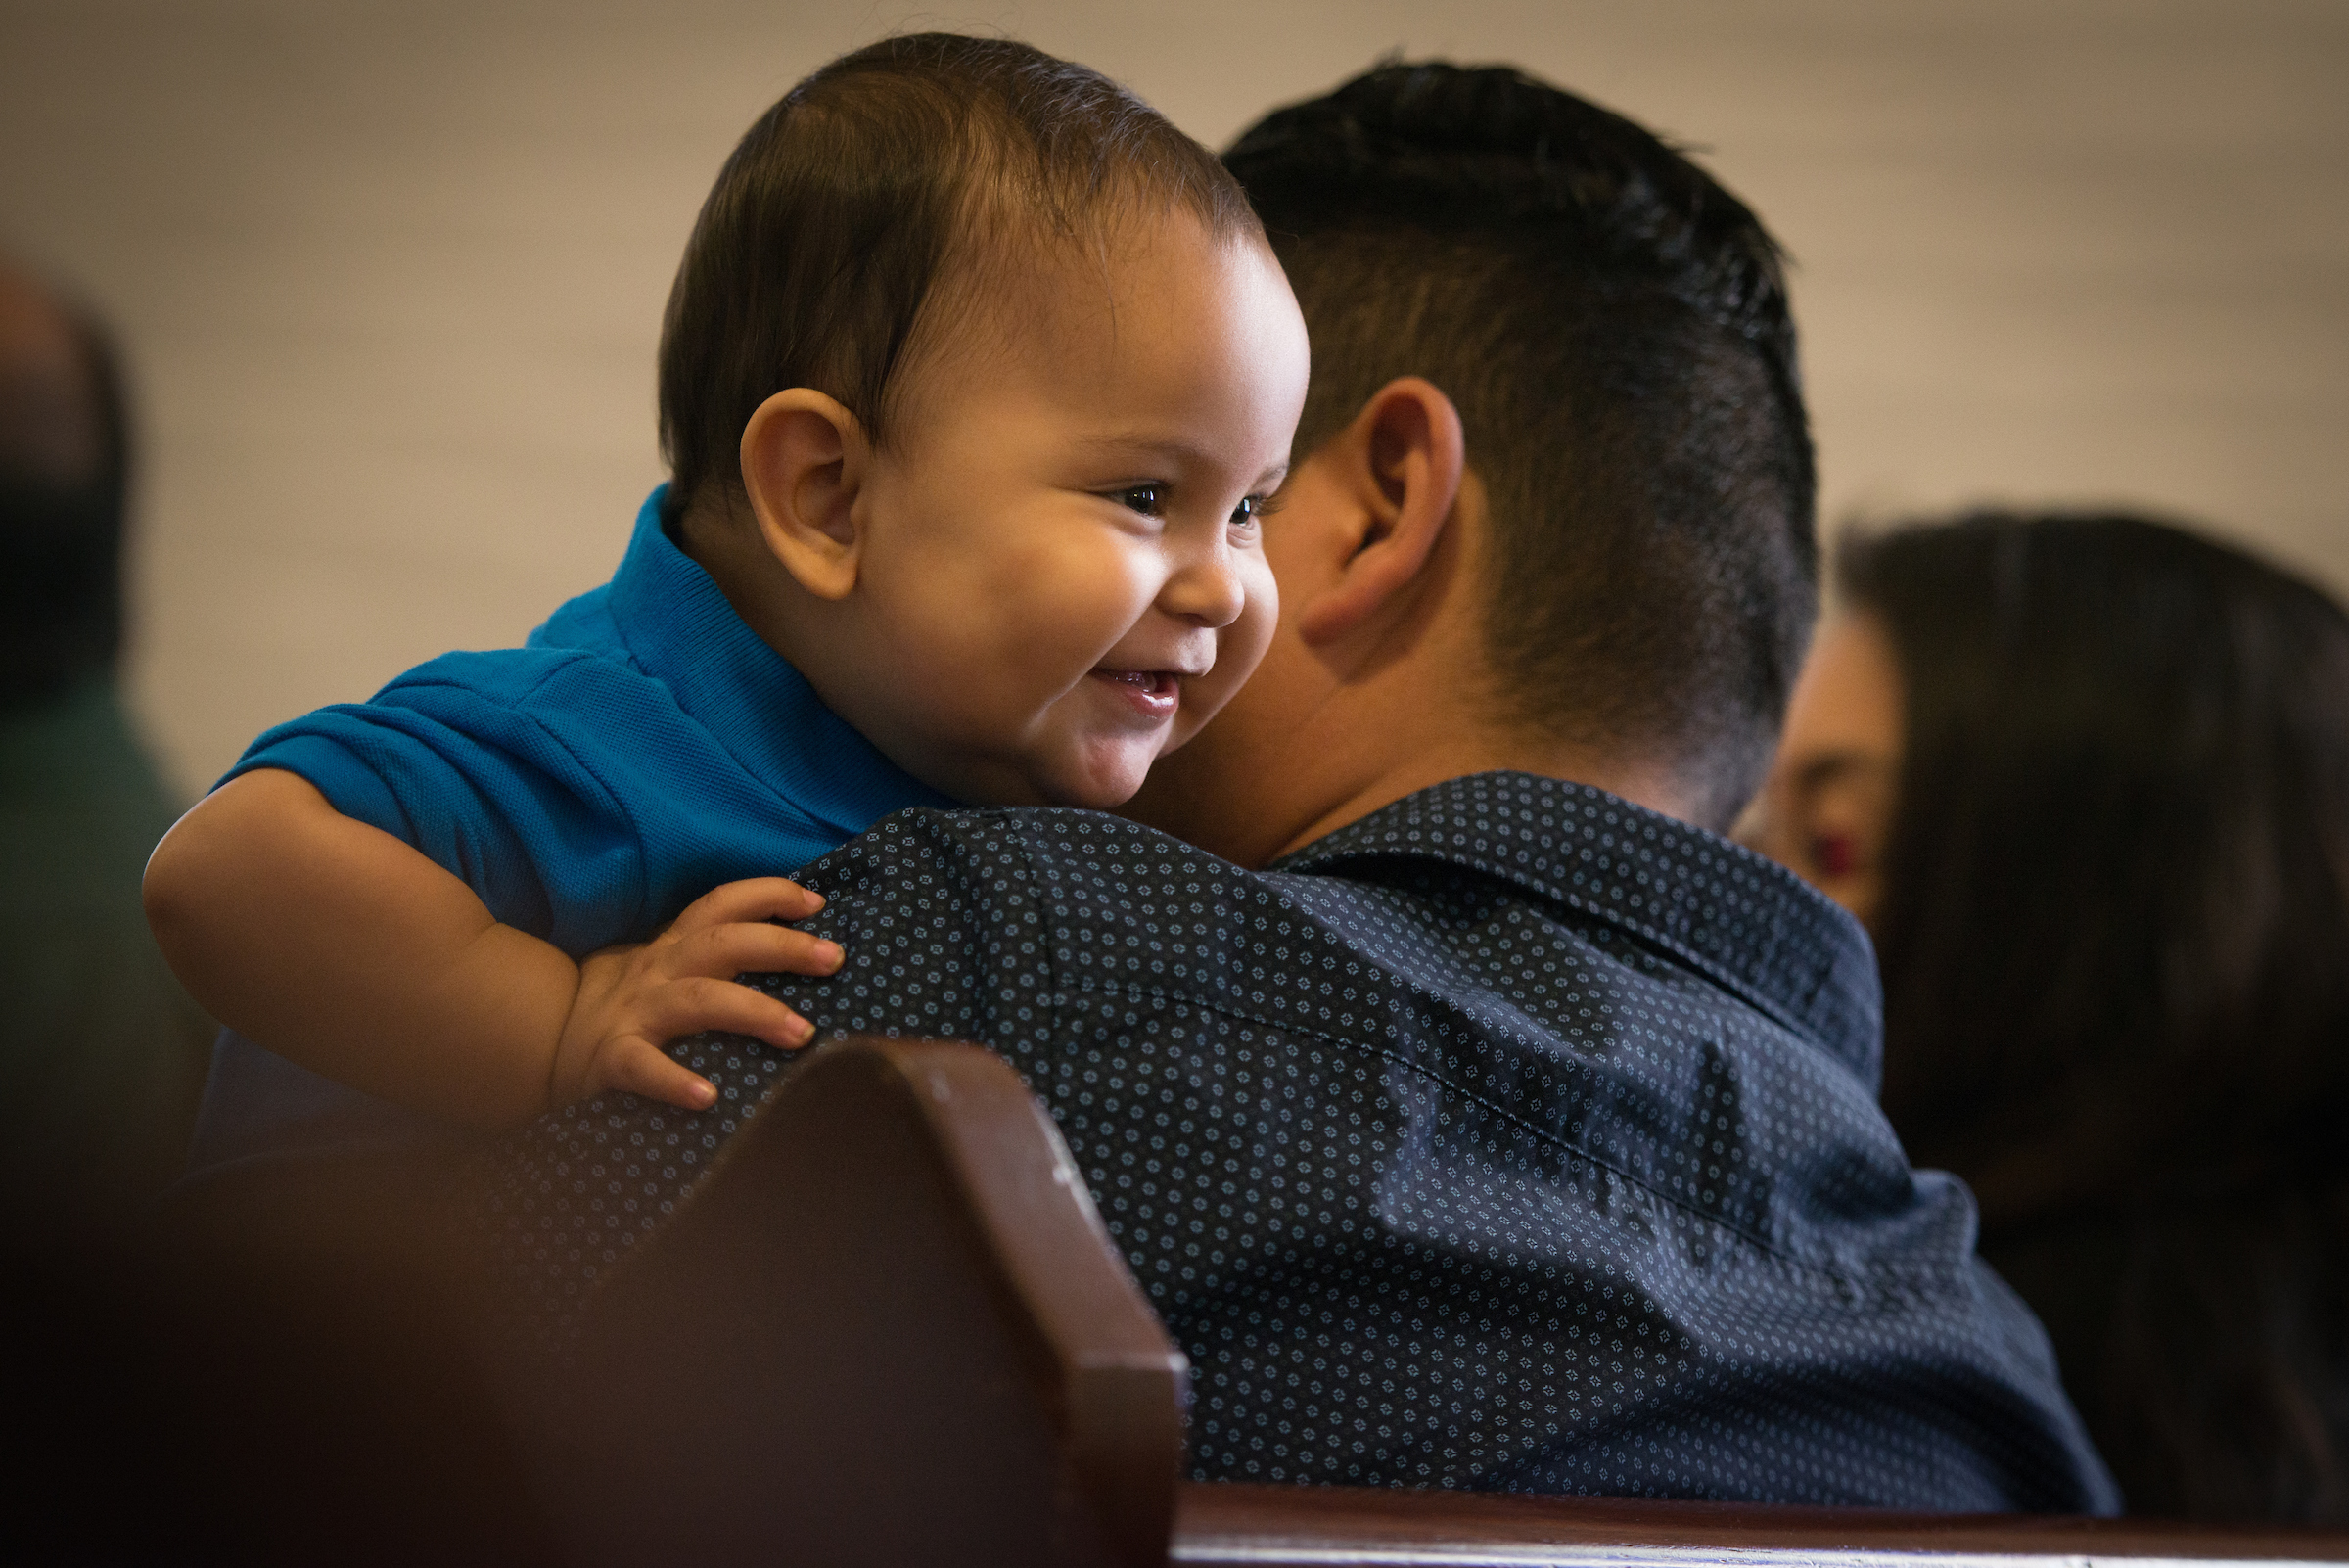 Daniel Anthony Lopez eyes a parishioner behind him as he plays on the lap of his father Daniel Lopez during worship at El Calvario Lutheran Church on Sunday, April 17, 2016, in Brownsville, Texas. LCMS Communications/Erik M. Lunsford